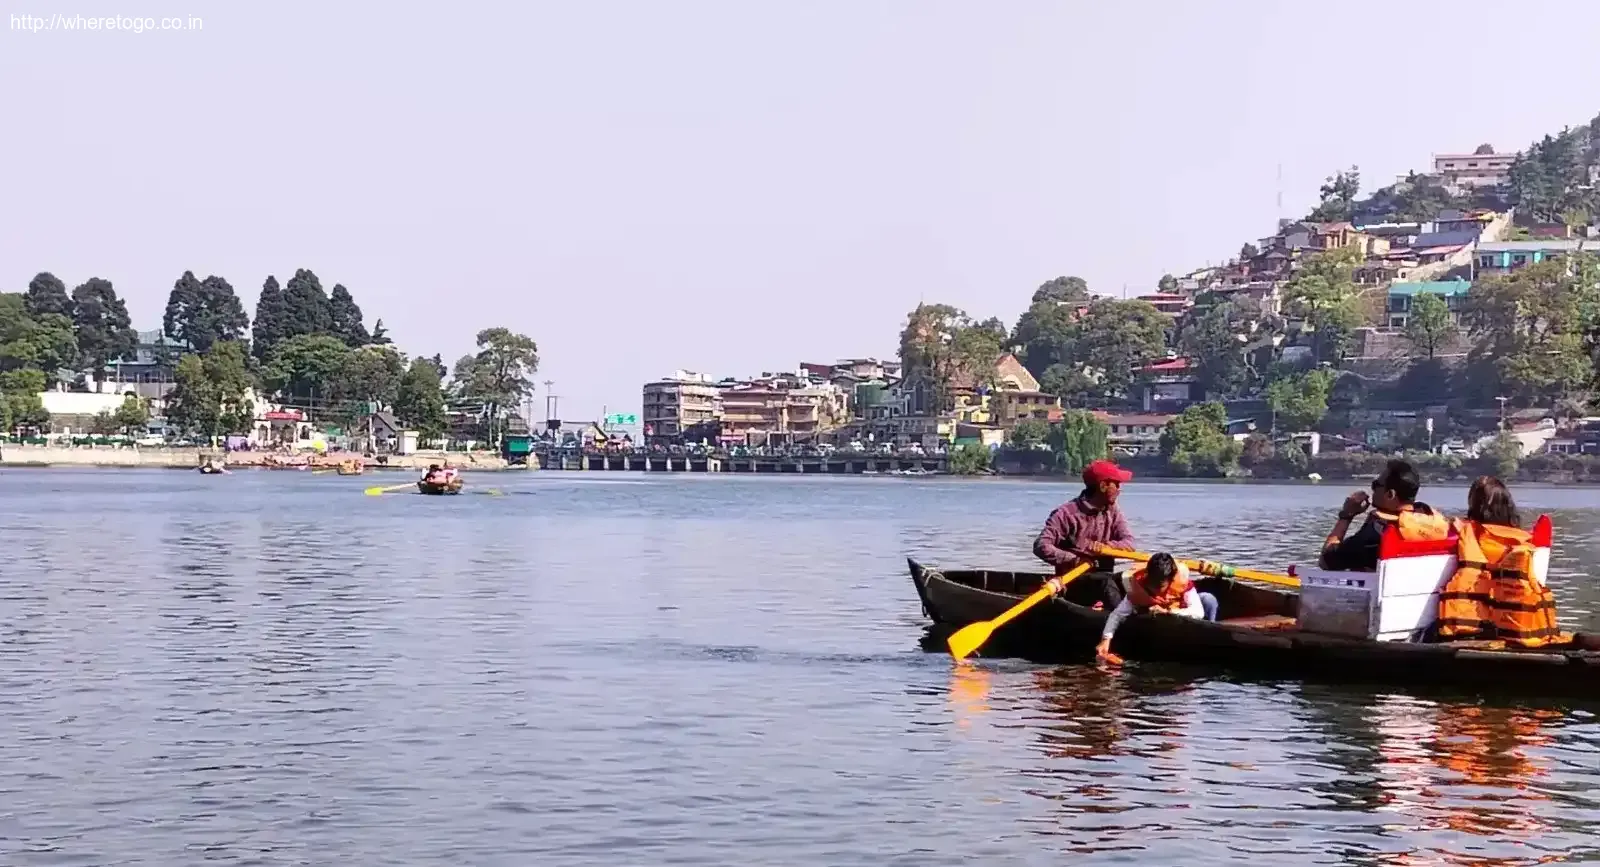 Spend 2 Days in Nainital: A Travel Guide